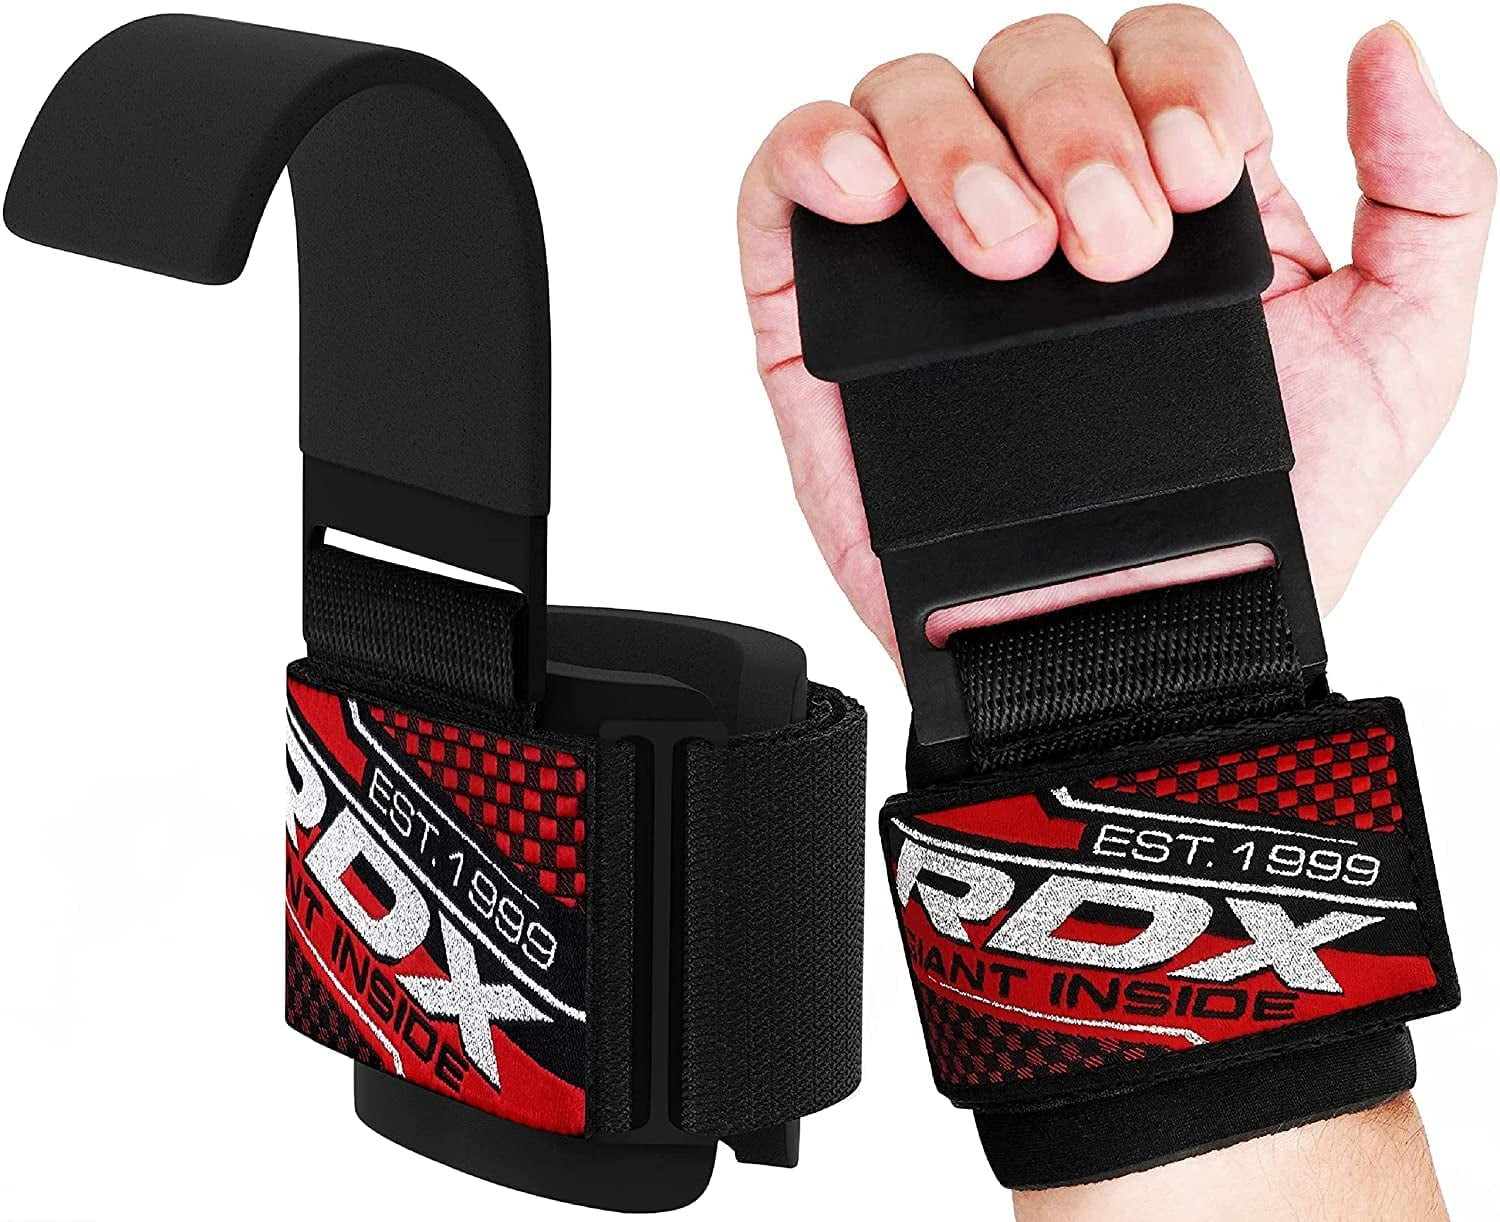 RDX Pro Gym Weight Lifting Hook With Wrist Strap Support 